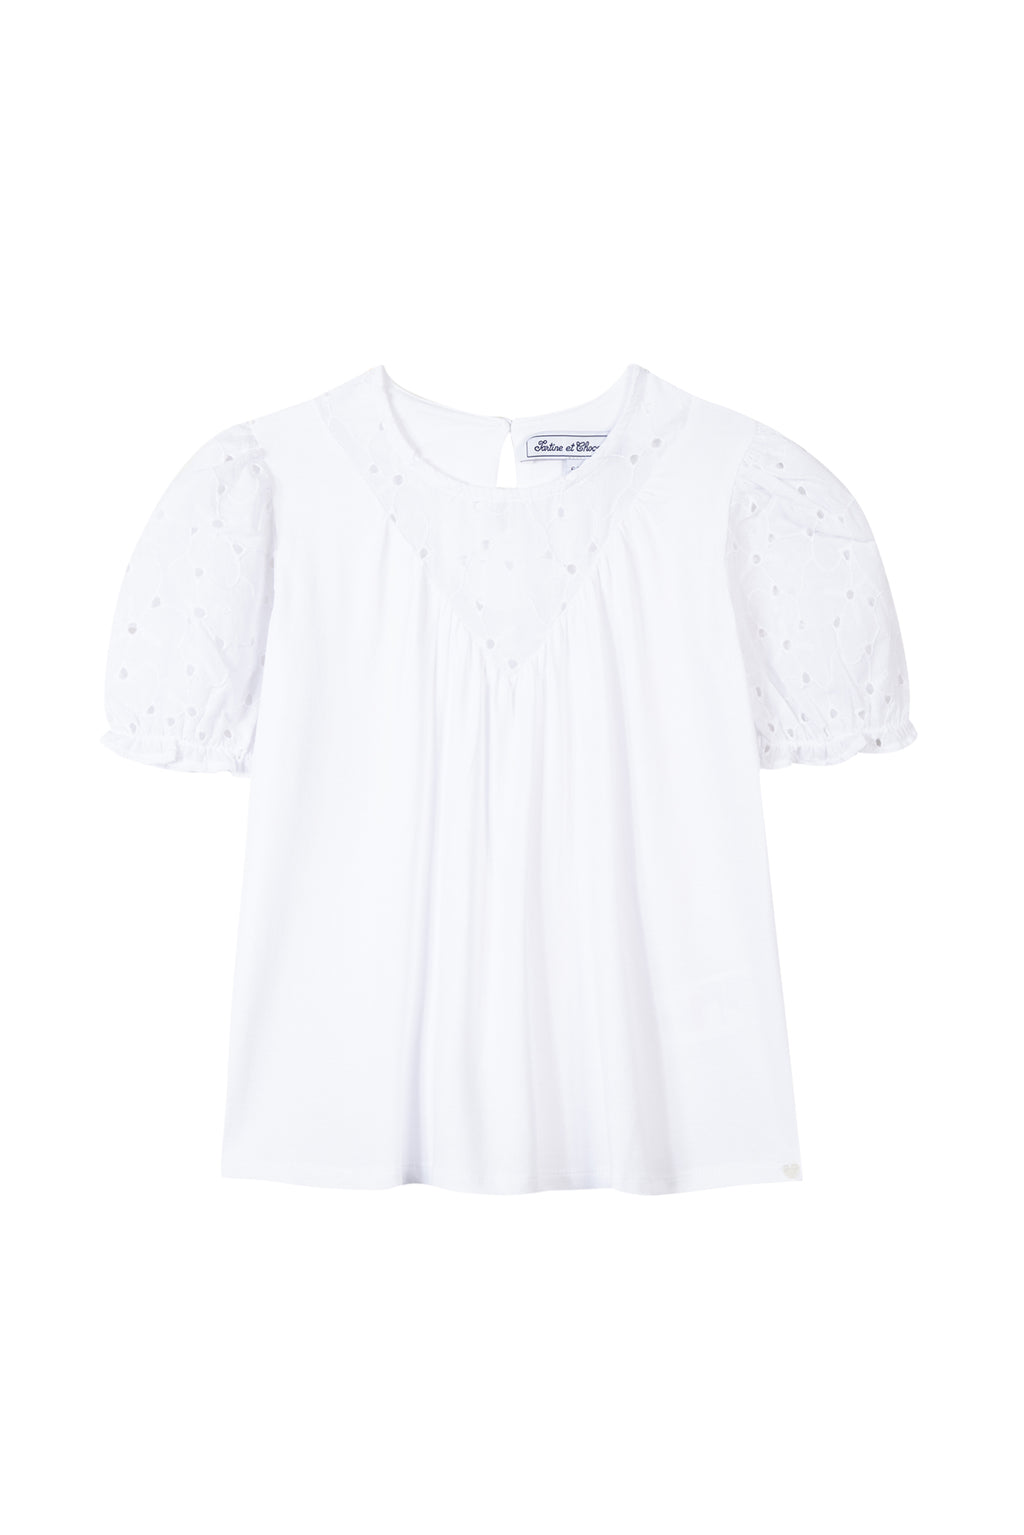 T-shirt - White Embrodery English